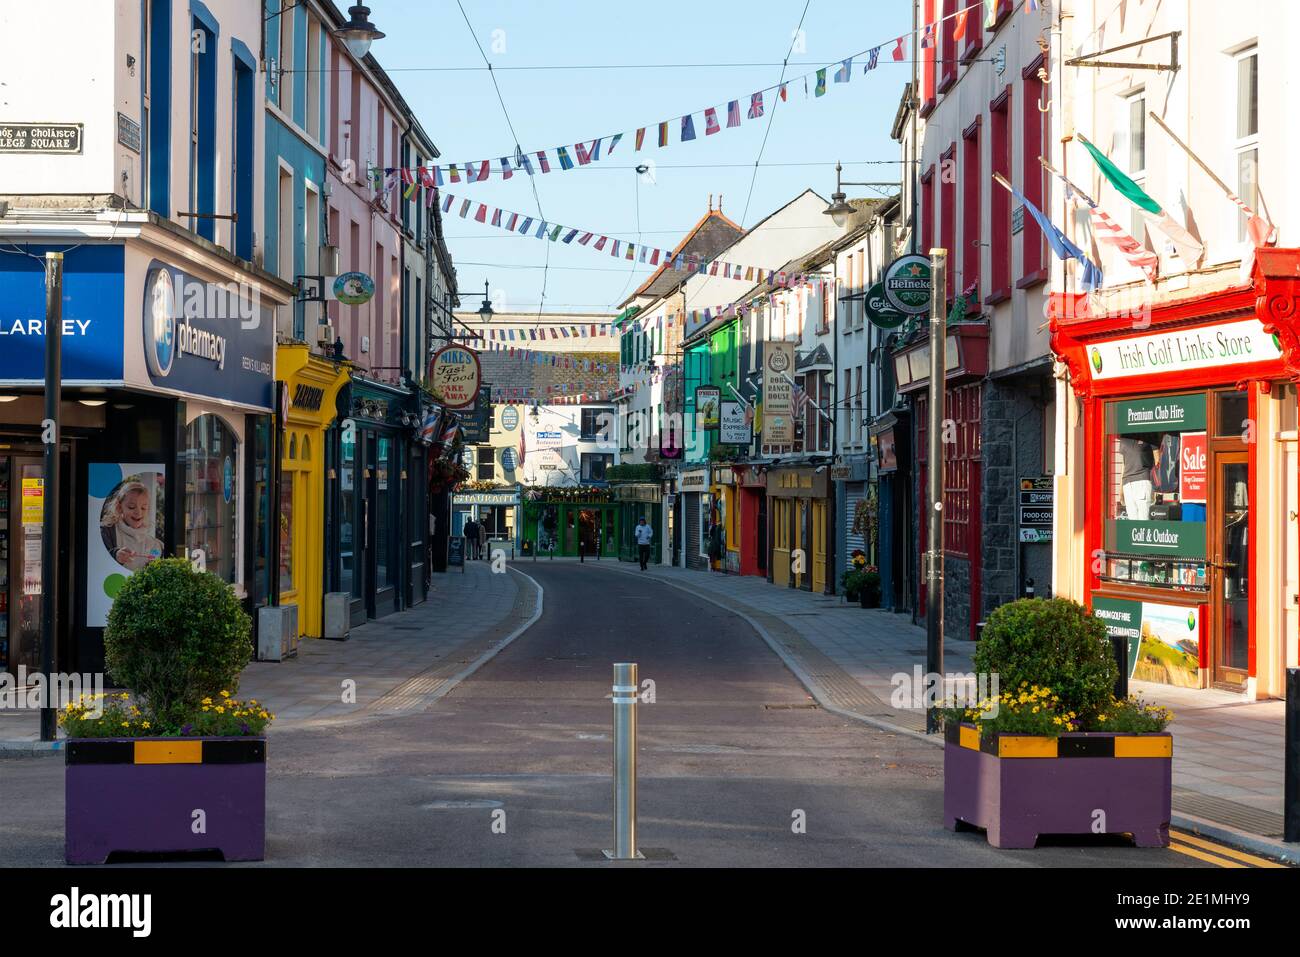 Shopping street in Killarney, Ireland. The Plunkett Street in Killarney County Kerry Ireland quiet empty and deserted with no cars as of October 2020 Stock Photo